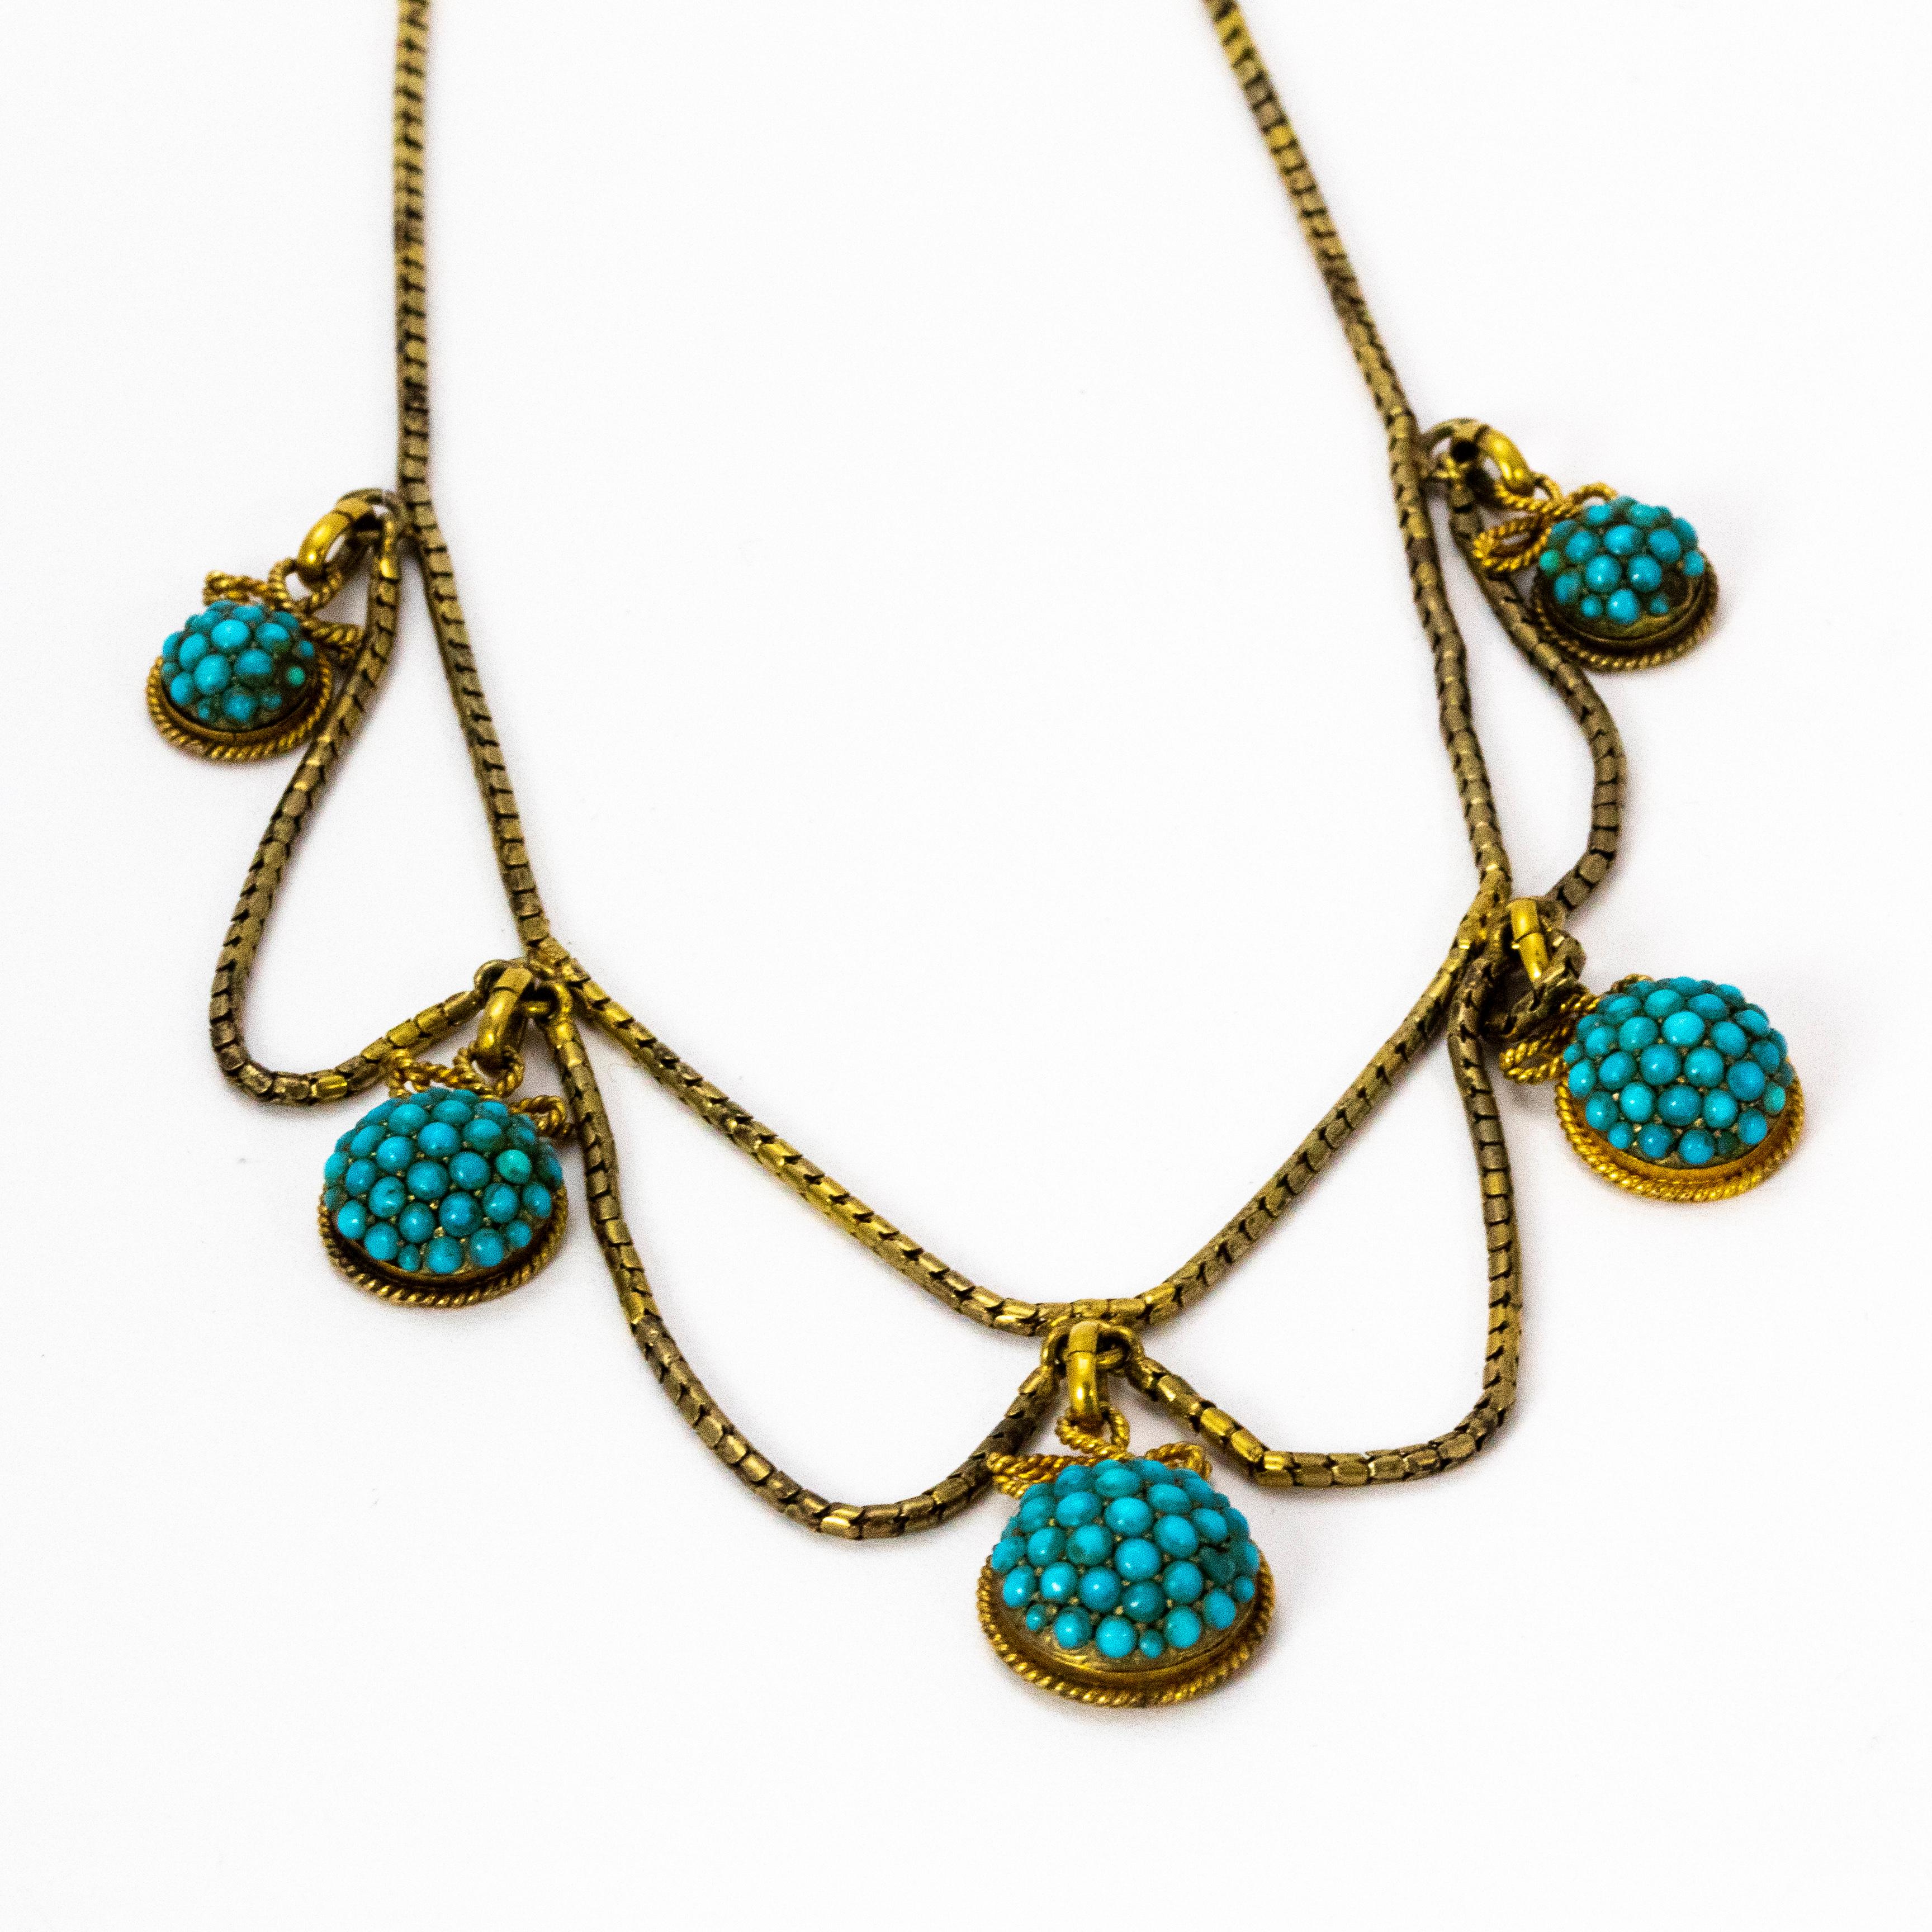 A superb Victorian necklace. On the fine cylindrical link chain hang five gold domes set with exquisite turquoise clusters. Atop each of these graduated clusters is a great rope bow design linking them to the chain. Modelled in 18 karat yellow